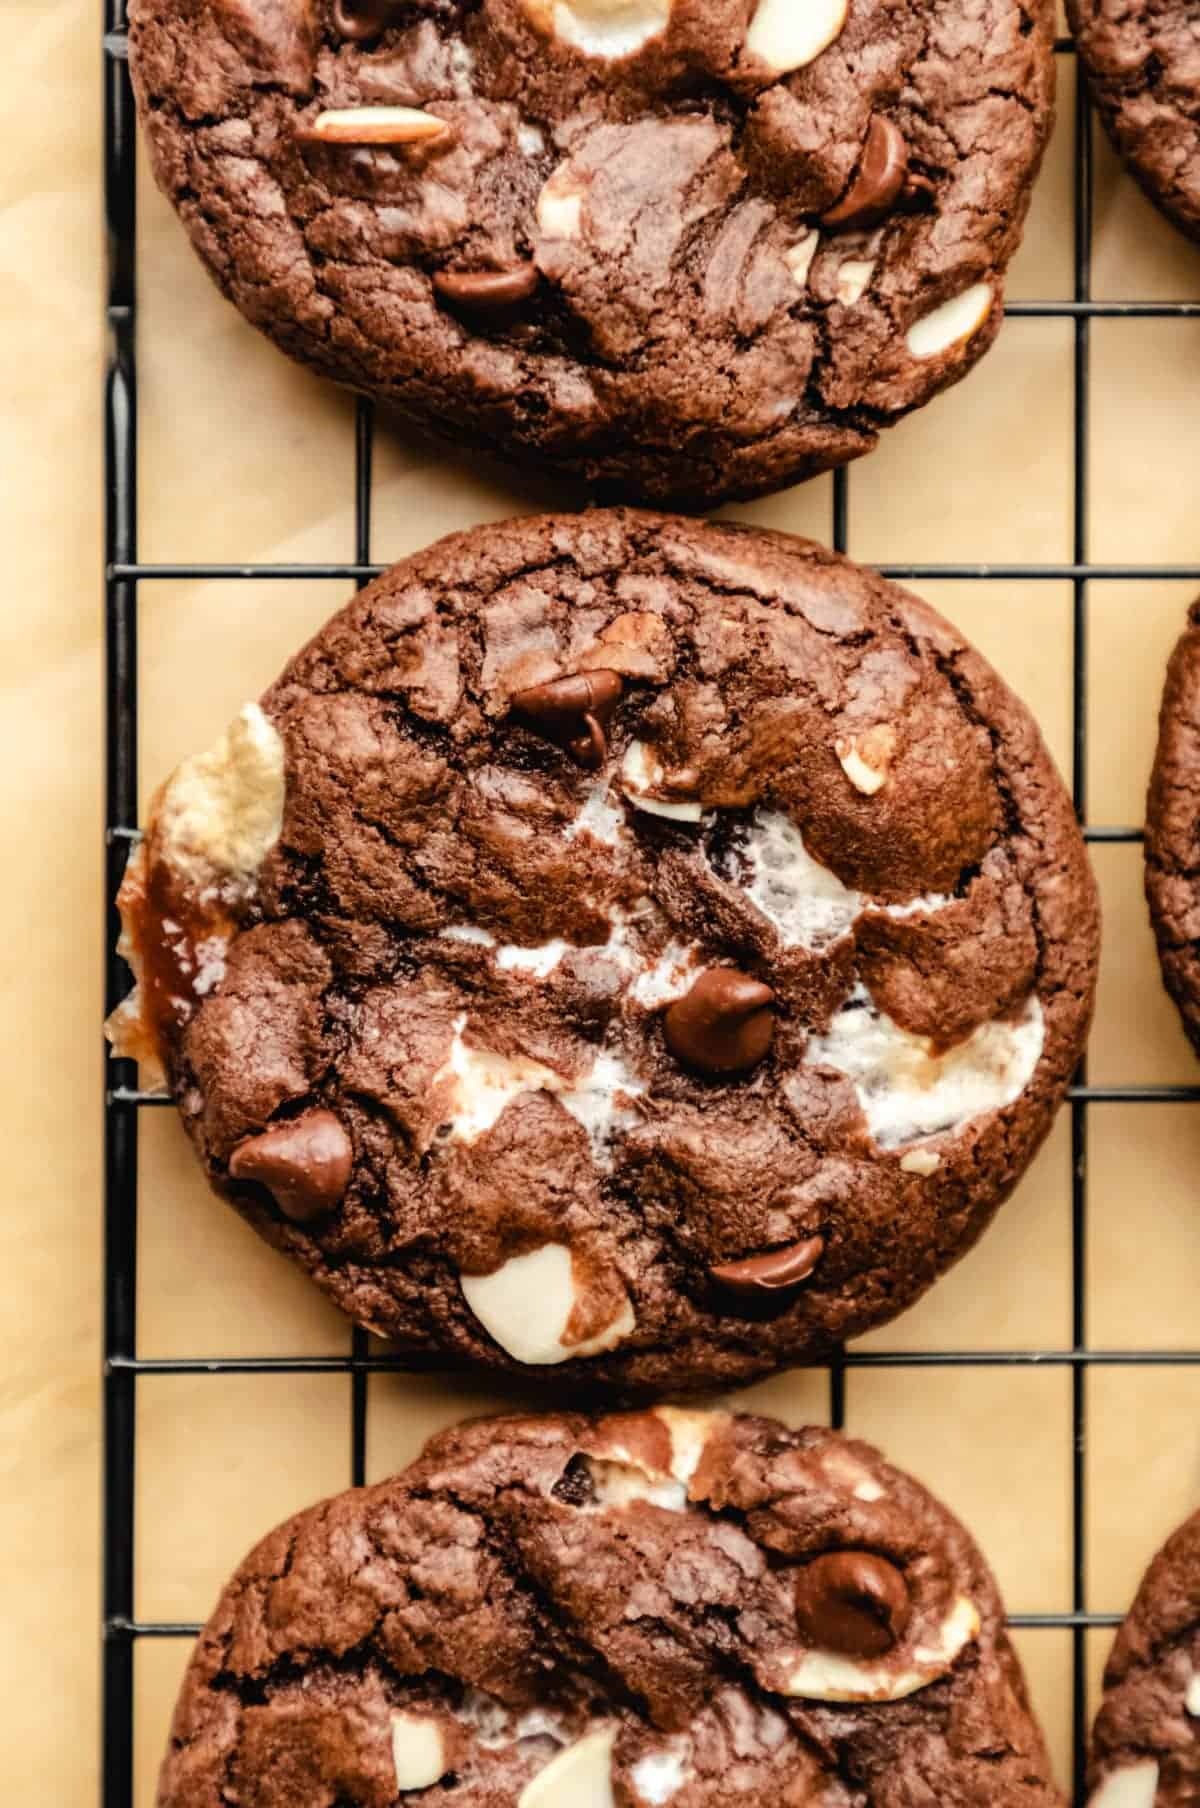 Unique chocolate chip cookies on a cooling rack.